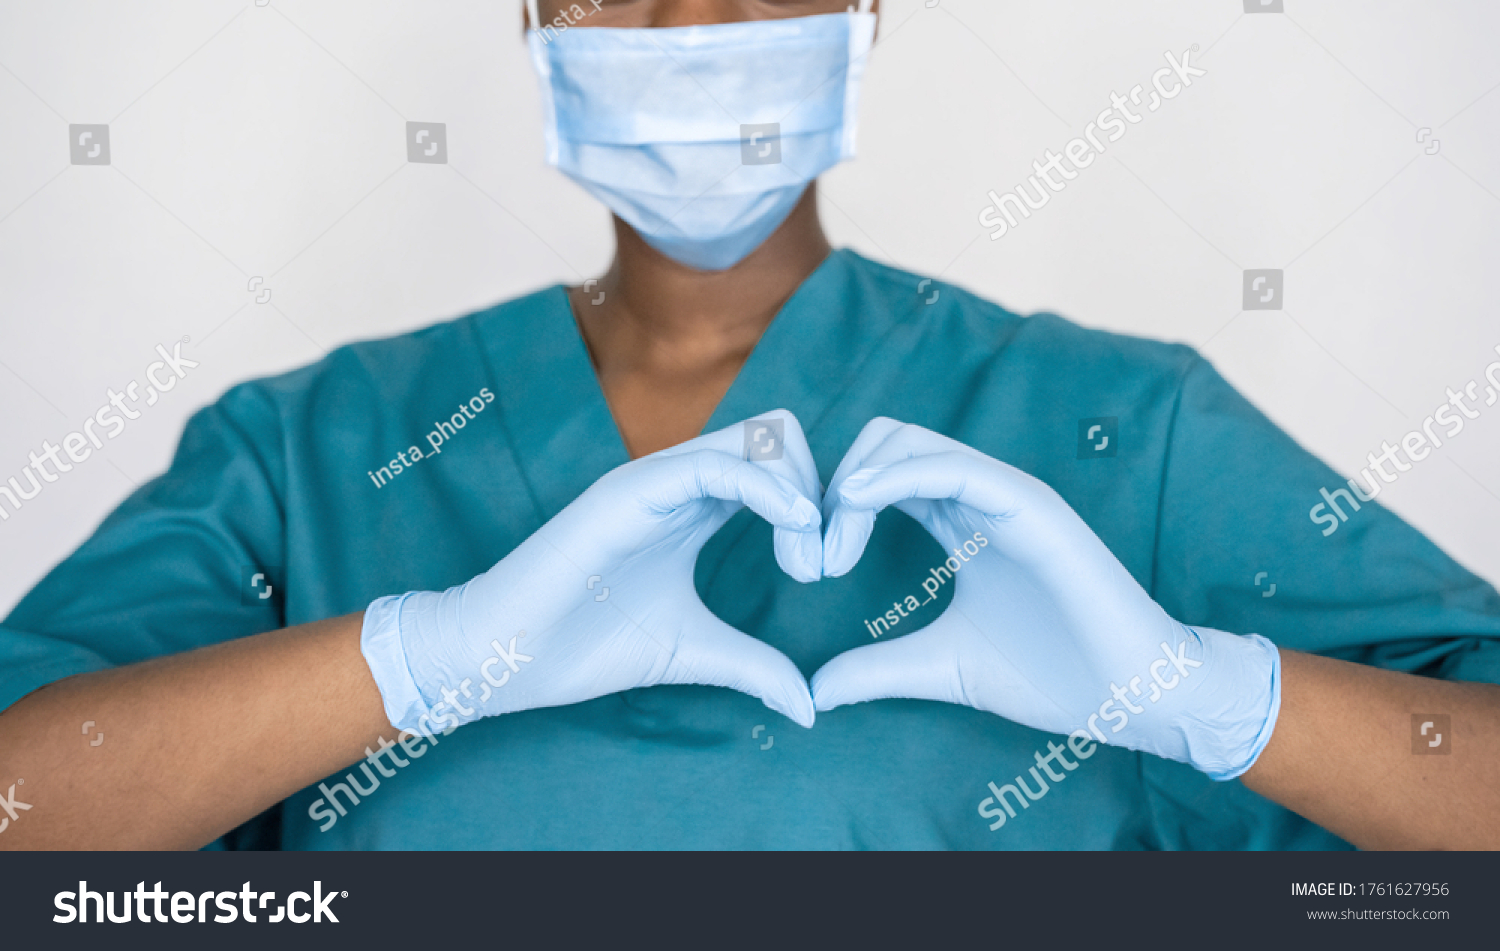 Female african professional medic nurse wear face mask, gloves, blue green uniform showing heart hands shape. Medical love, care and safety symbol, corona virus health protection sign concept. Closeup #1761627956